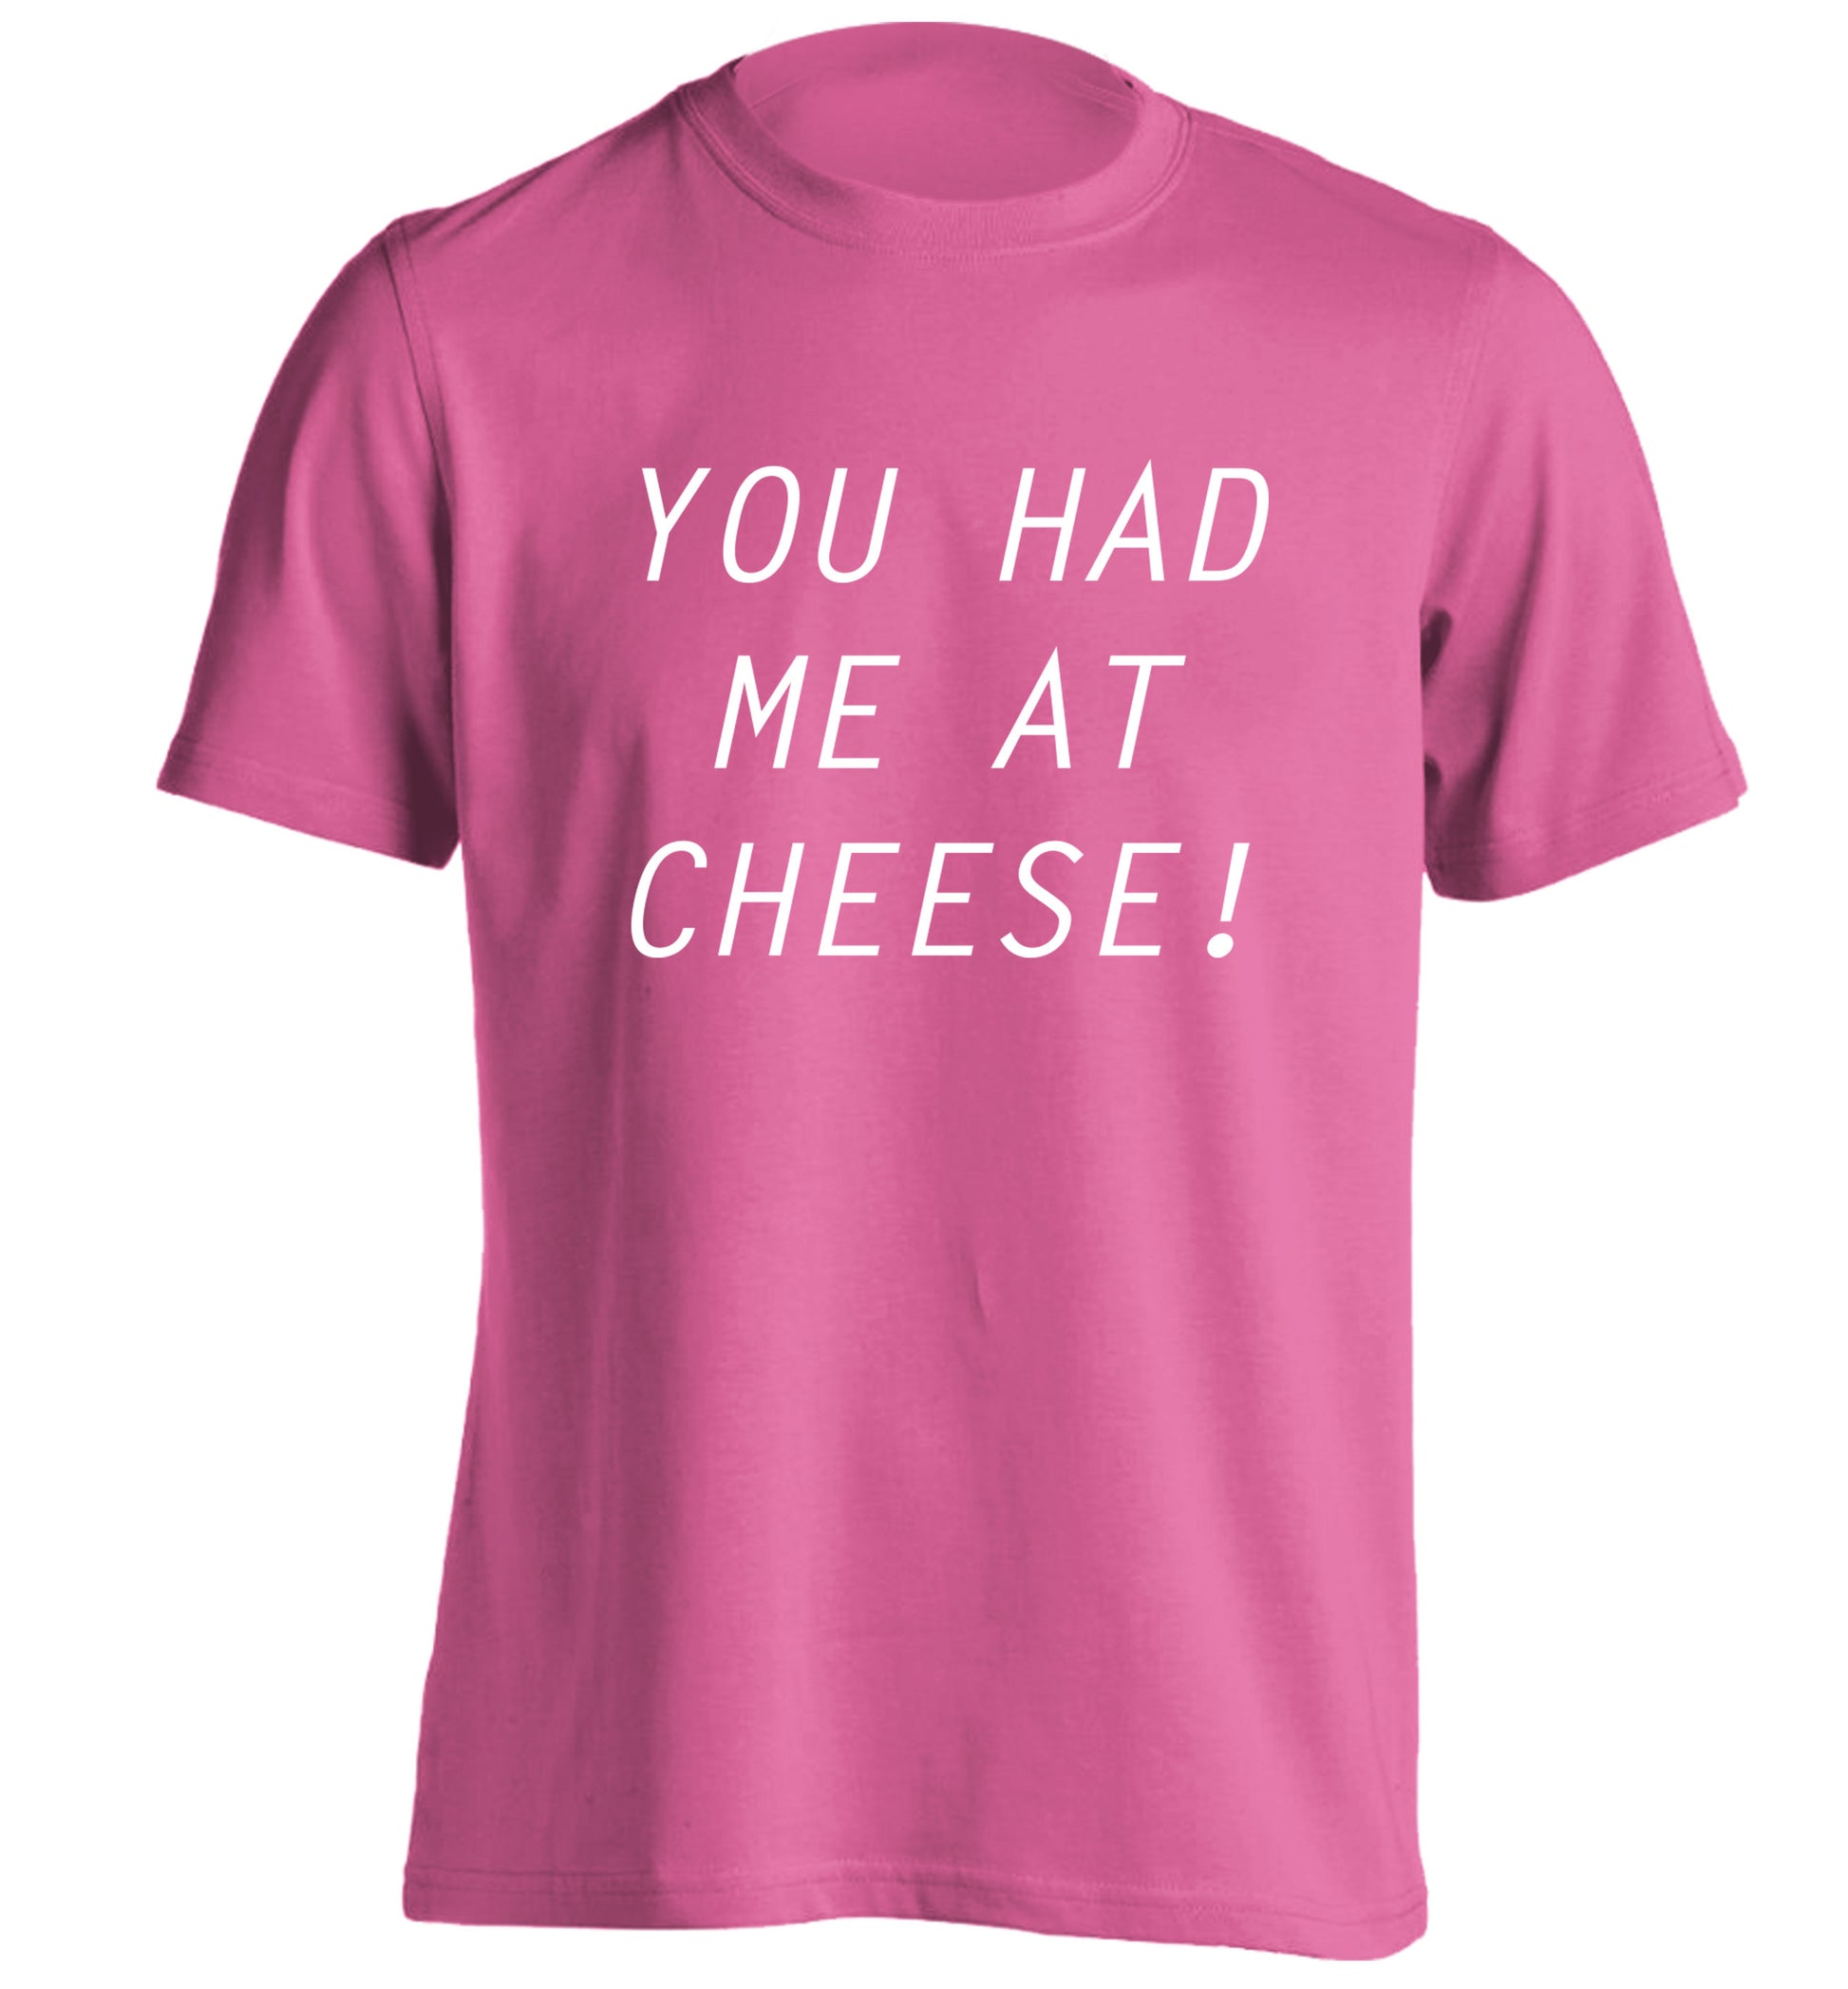 You had me at cheese adults unisex pink Tshirt 2XL